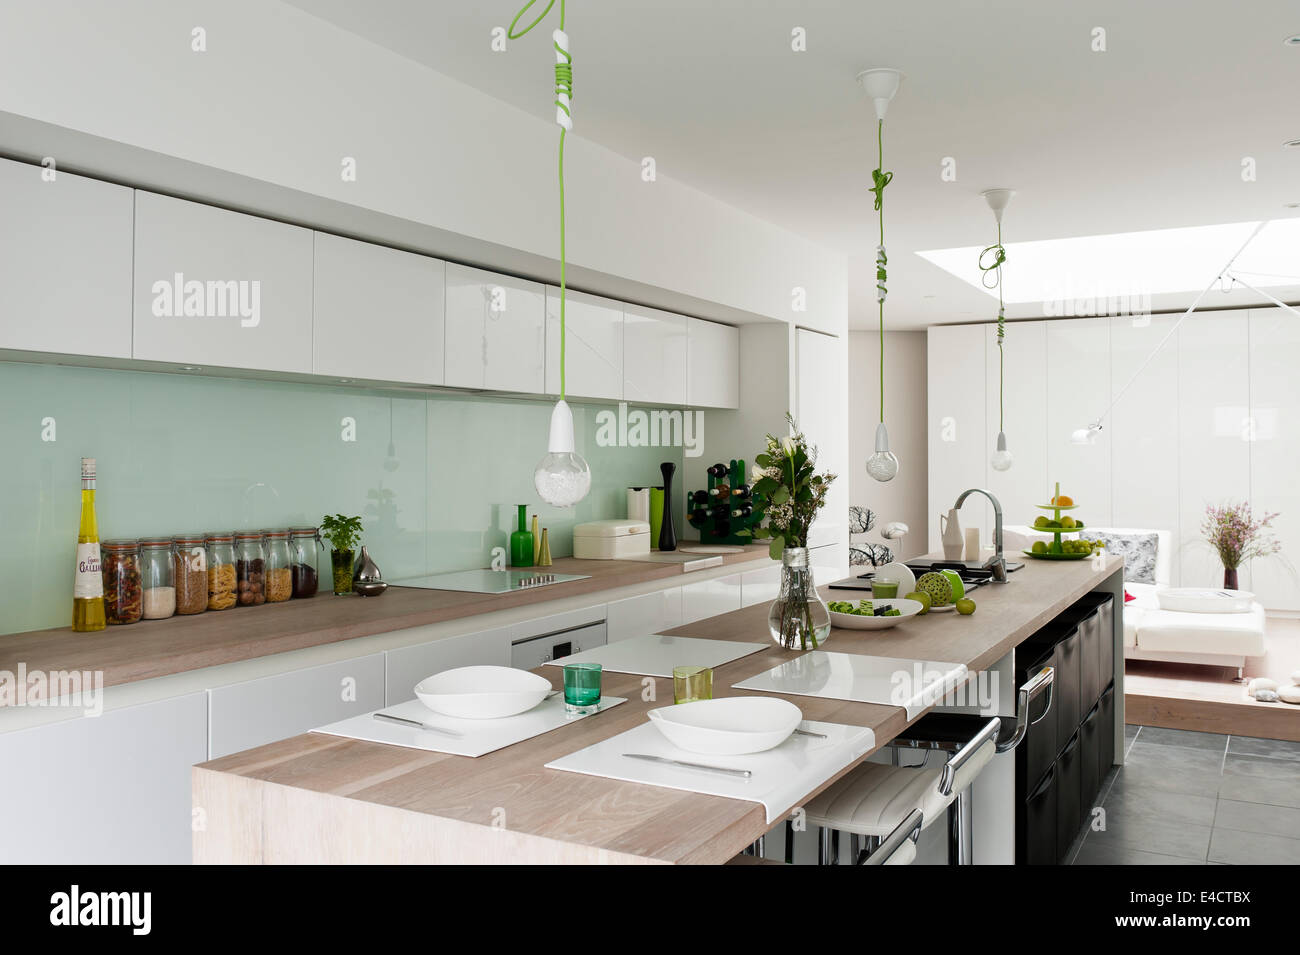 Modern kitchen from Beeck kuechen. The green corded pendant lights are by Nud and the barstools by Dwell Stock Photo